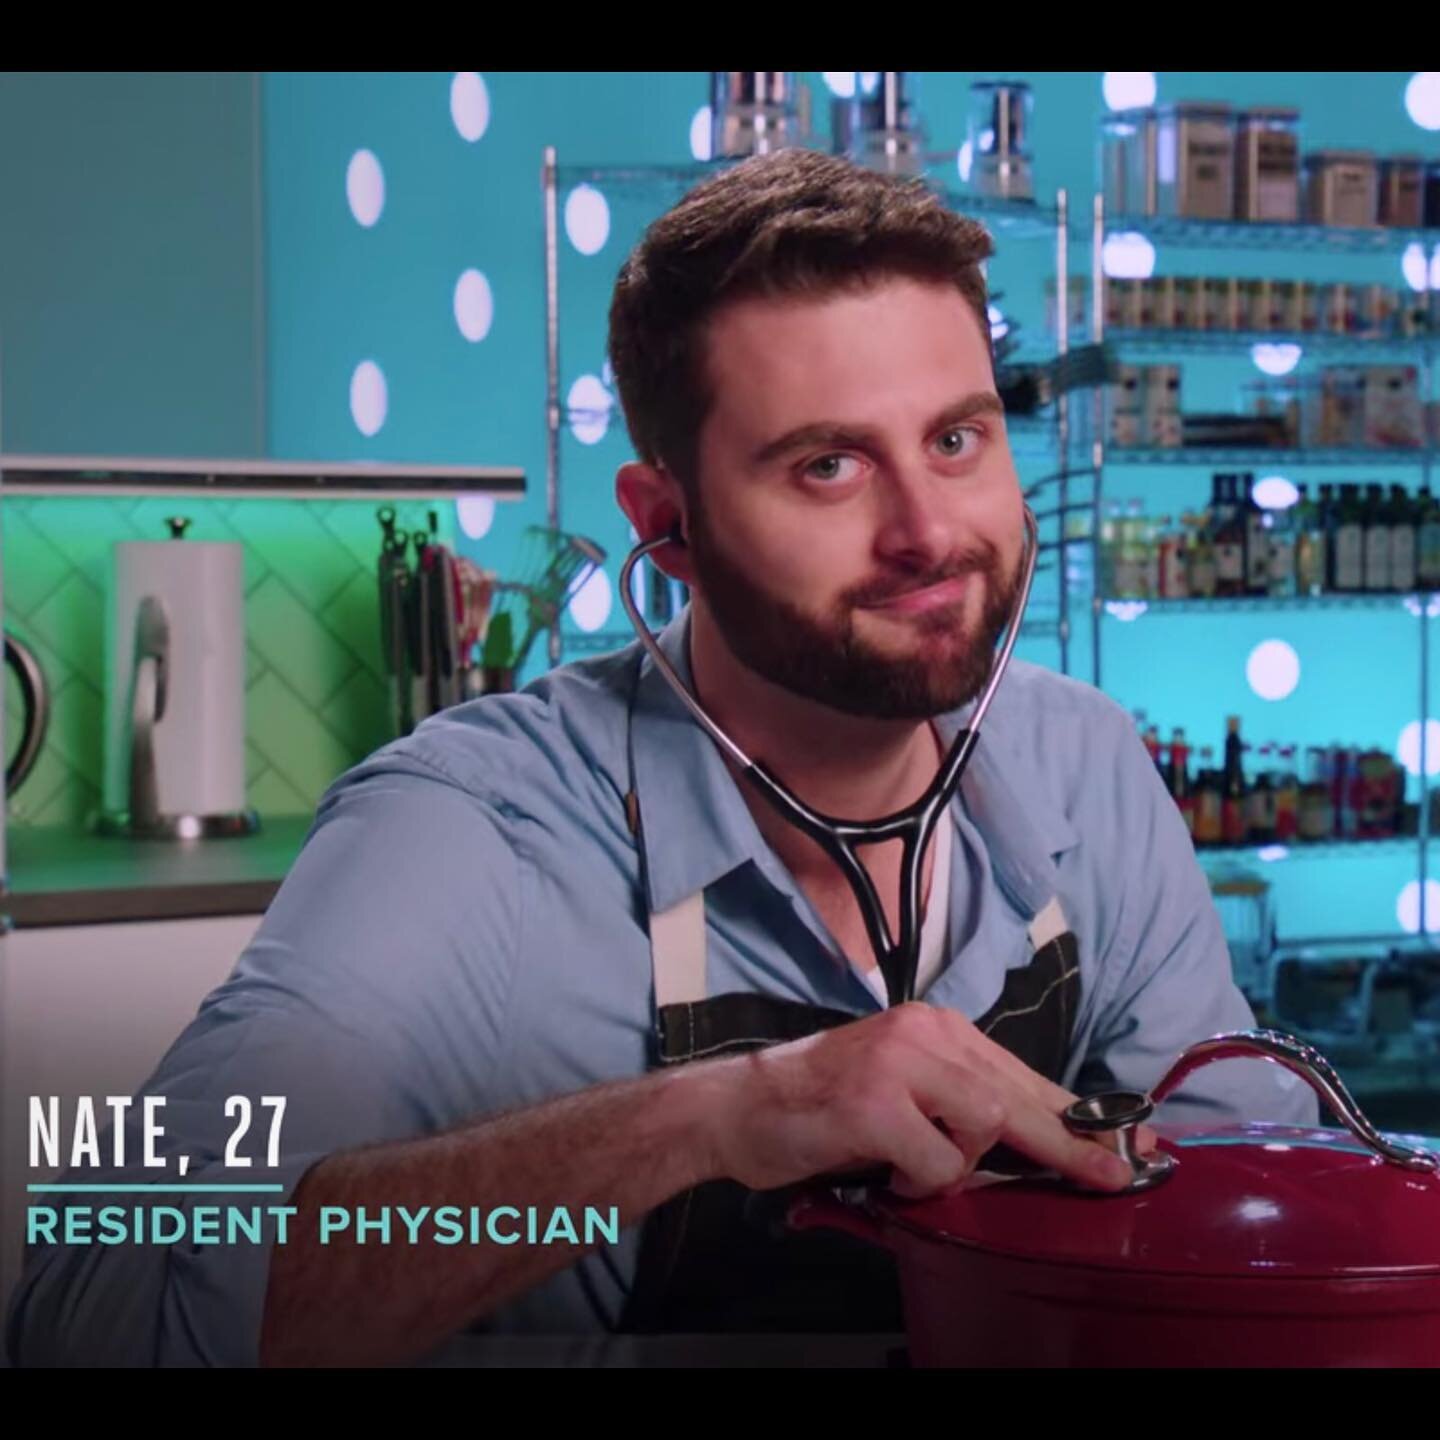 &ldquo;Best Leftovers Ever!&rdquo; premieres today on @netflix! Catch me listening for heart sounds on this enamel pot and all sorts of other shenanigans in episode 4 🎥😎